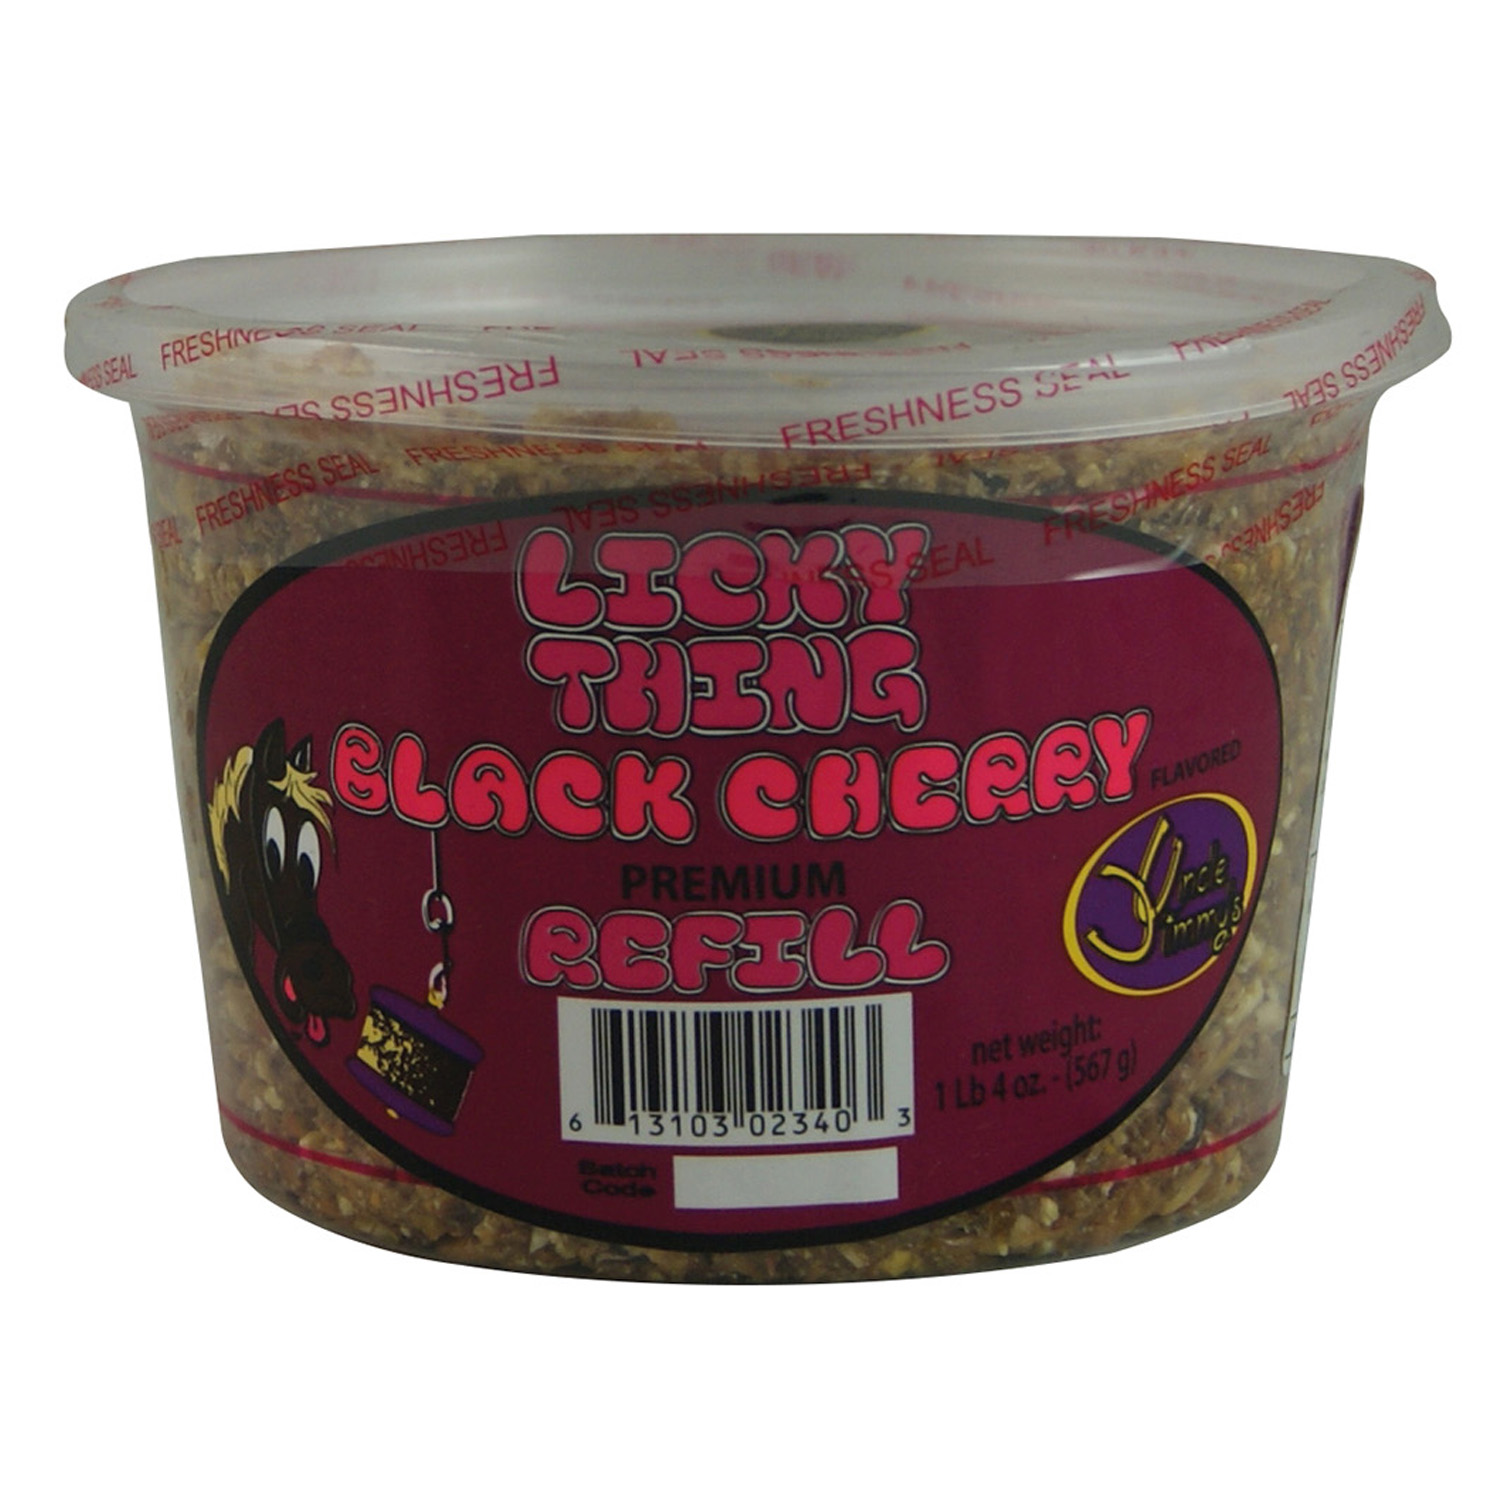 UNCLE JIMMYS LICKY THING BLACK CHERRY  BLACK CHERRY